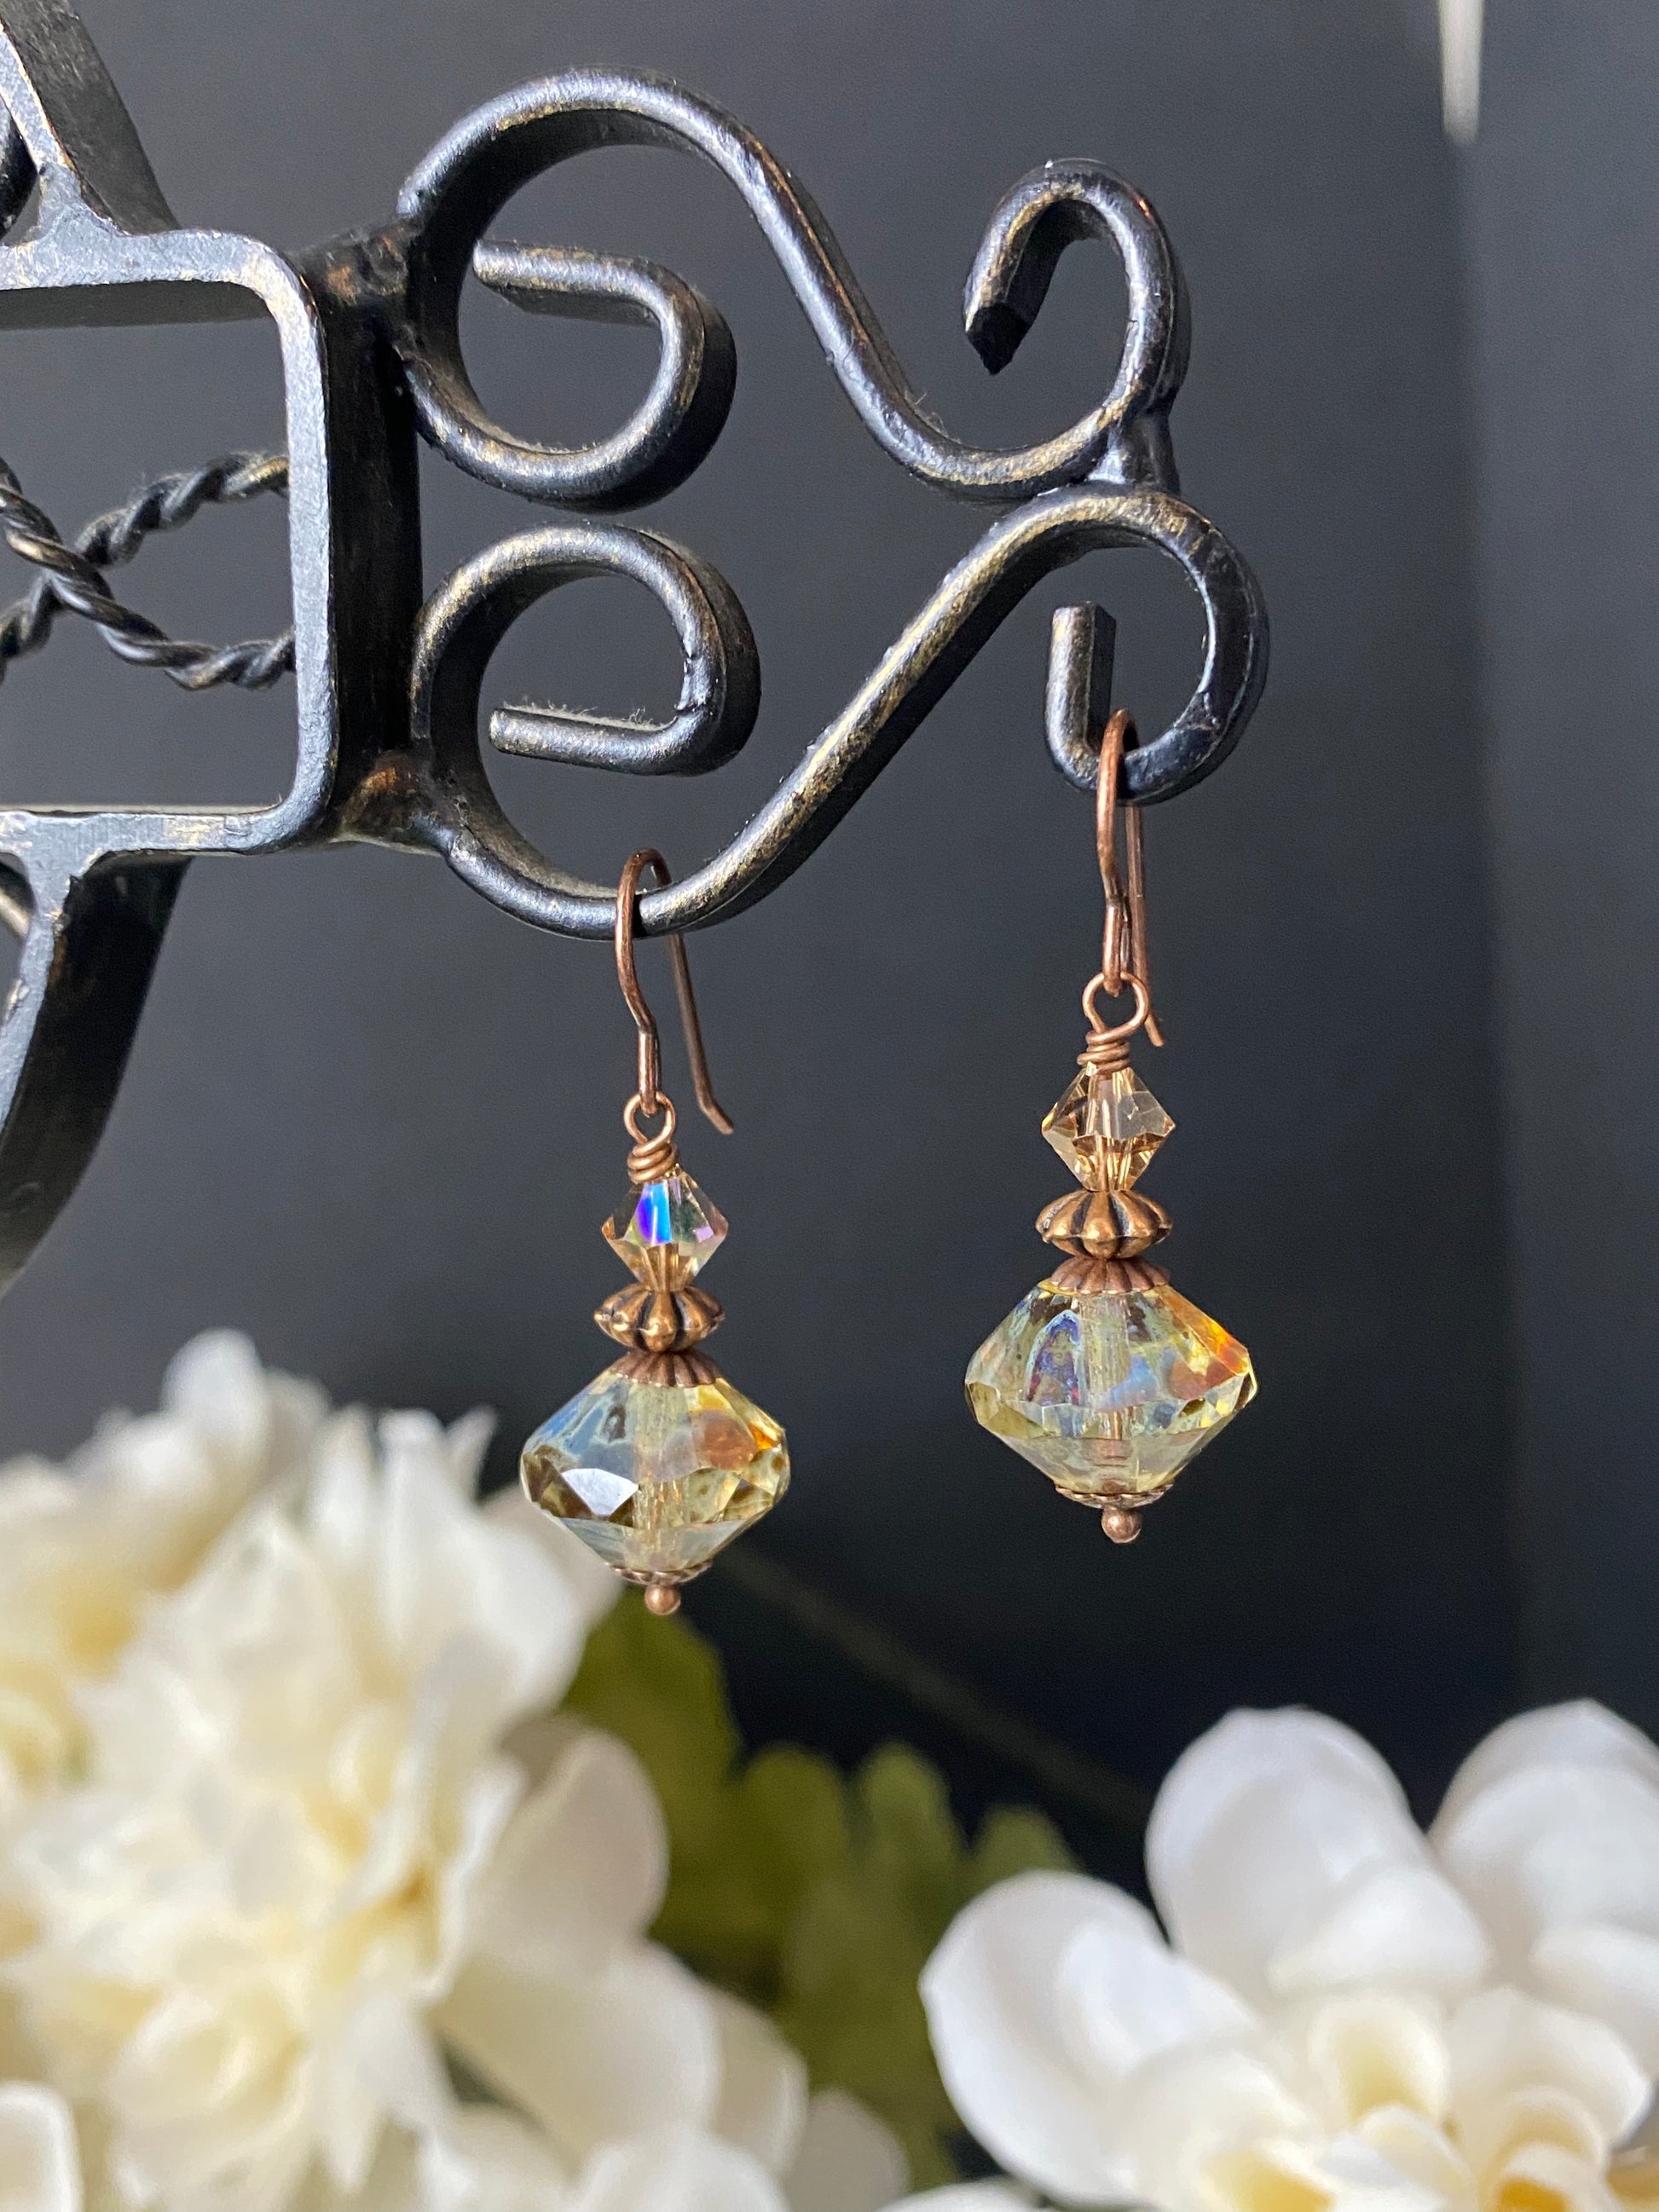 Tan Czech glass, Picasso glass, small earrings, and copper metal earrings. - Andria Bieber Designs 